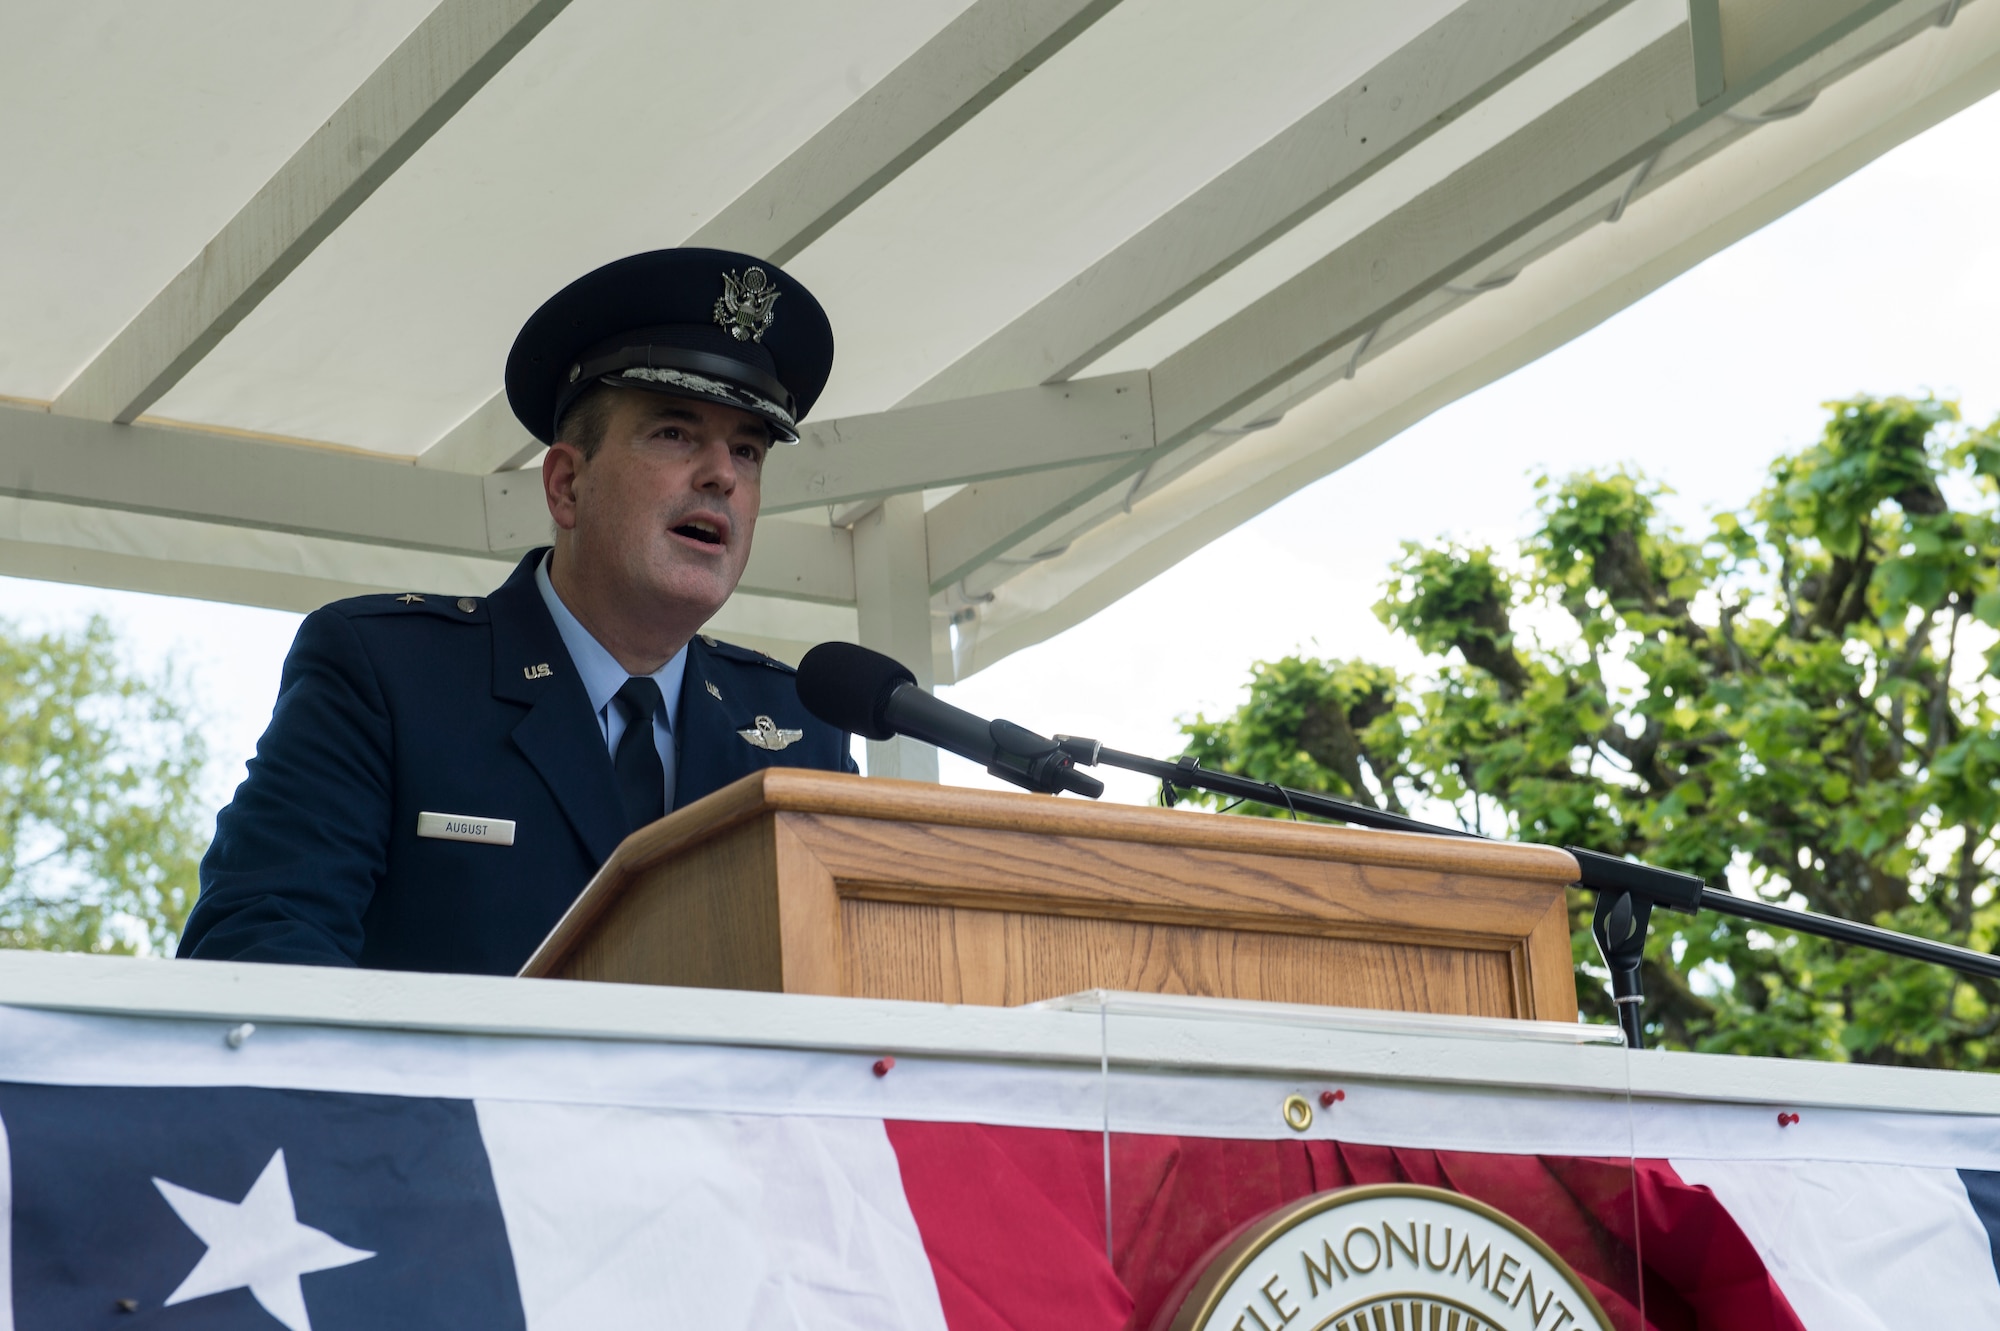 U.S. Air Force Brig. Gen. Mark R. August, 86th Airlift Wing commander, speaks to attendees of a Memorial Day ceremony at the Saint-Mihiel American Cemetery, Thiaucourt-Regniéville, France, May 26, 2019. August spoke of the history of Memorial Day and importance of remembering those who perished. (U.S. Air Force photo by Staff Sgt. Jonathan Bass)